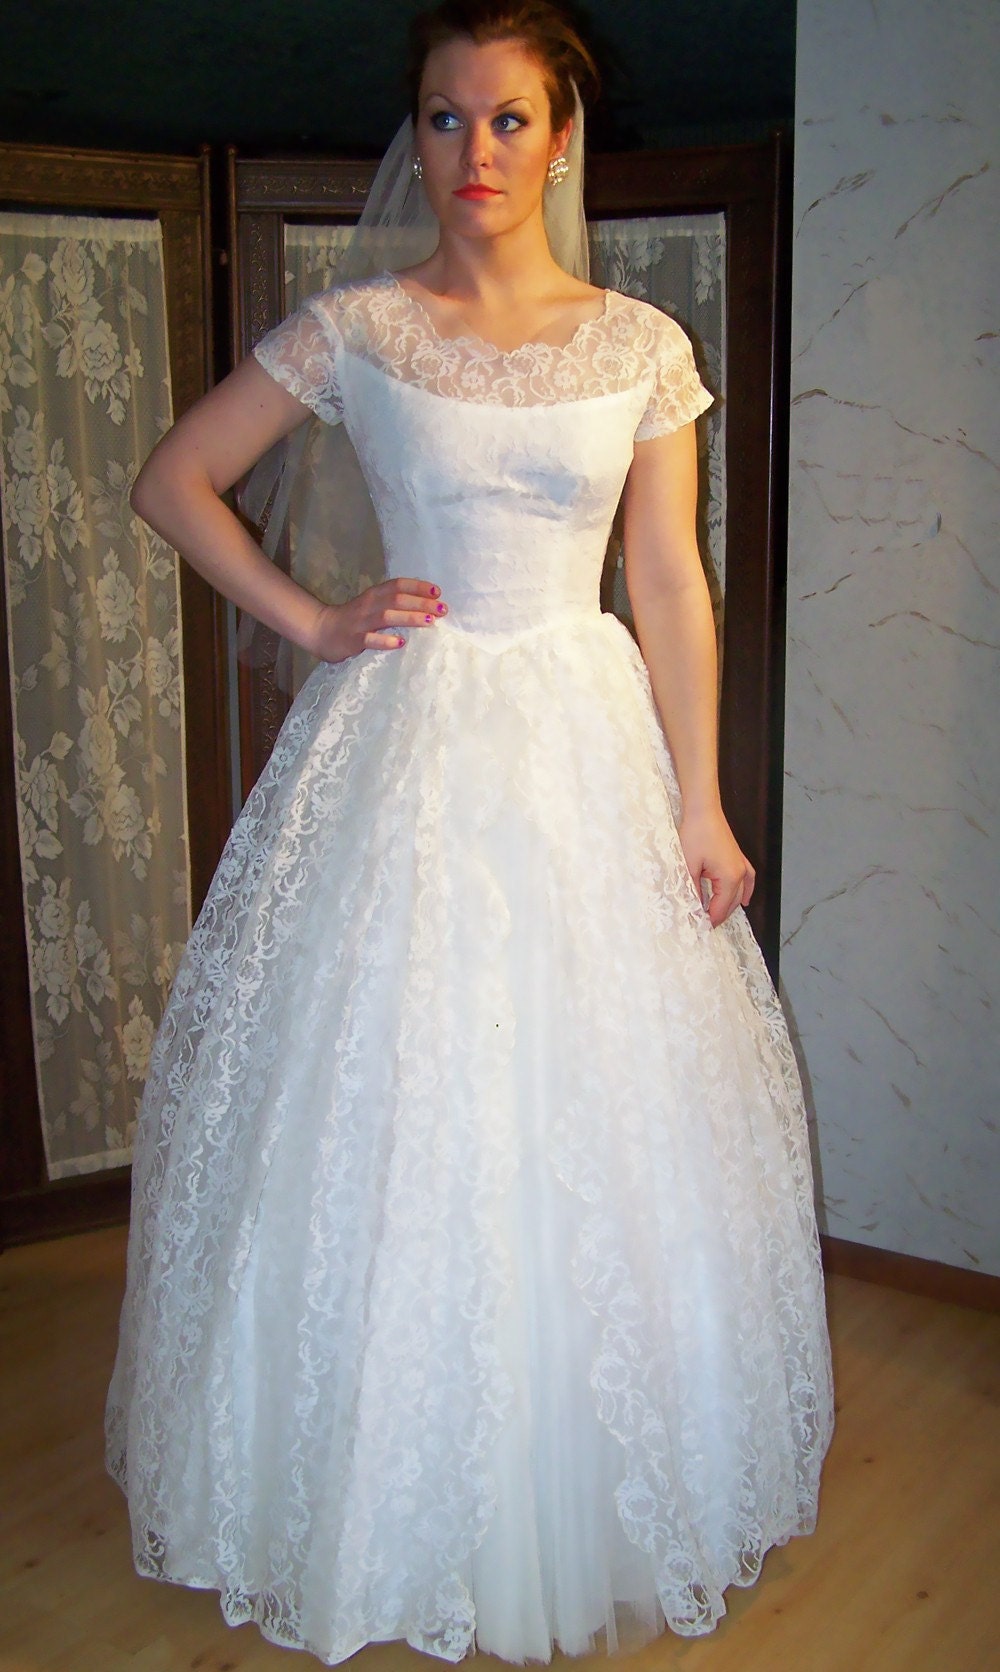 APRIL LOVE 1950s WHITE VINTAGE WEDDING GOWN WITH CHANTILLY LACE WITH TULLE PLEATING ACCENT